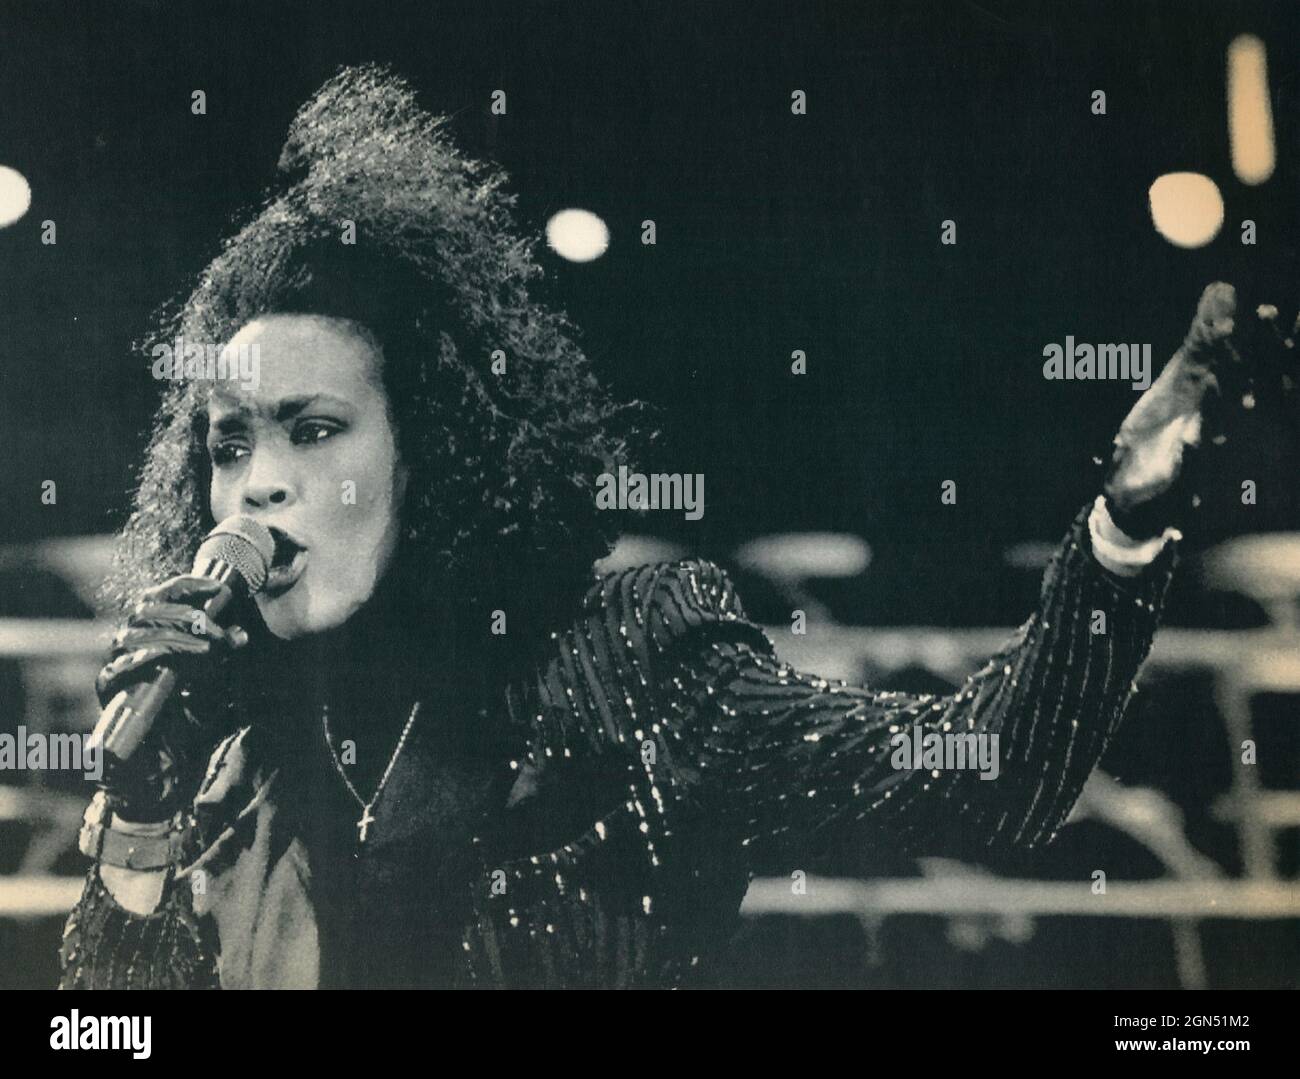 American singer Whitney Houston at a concert, 1989 Stock Photo